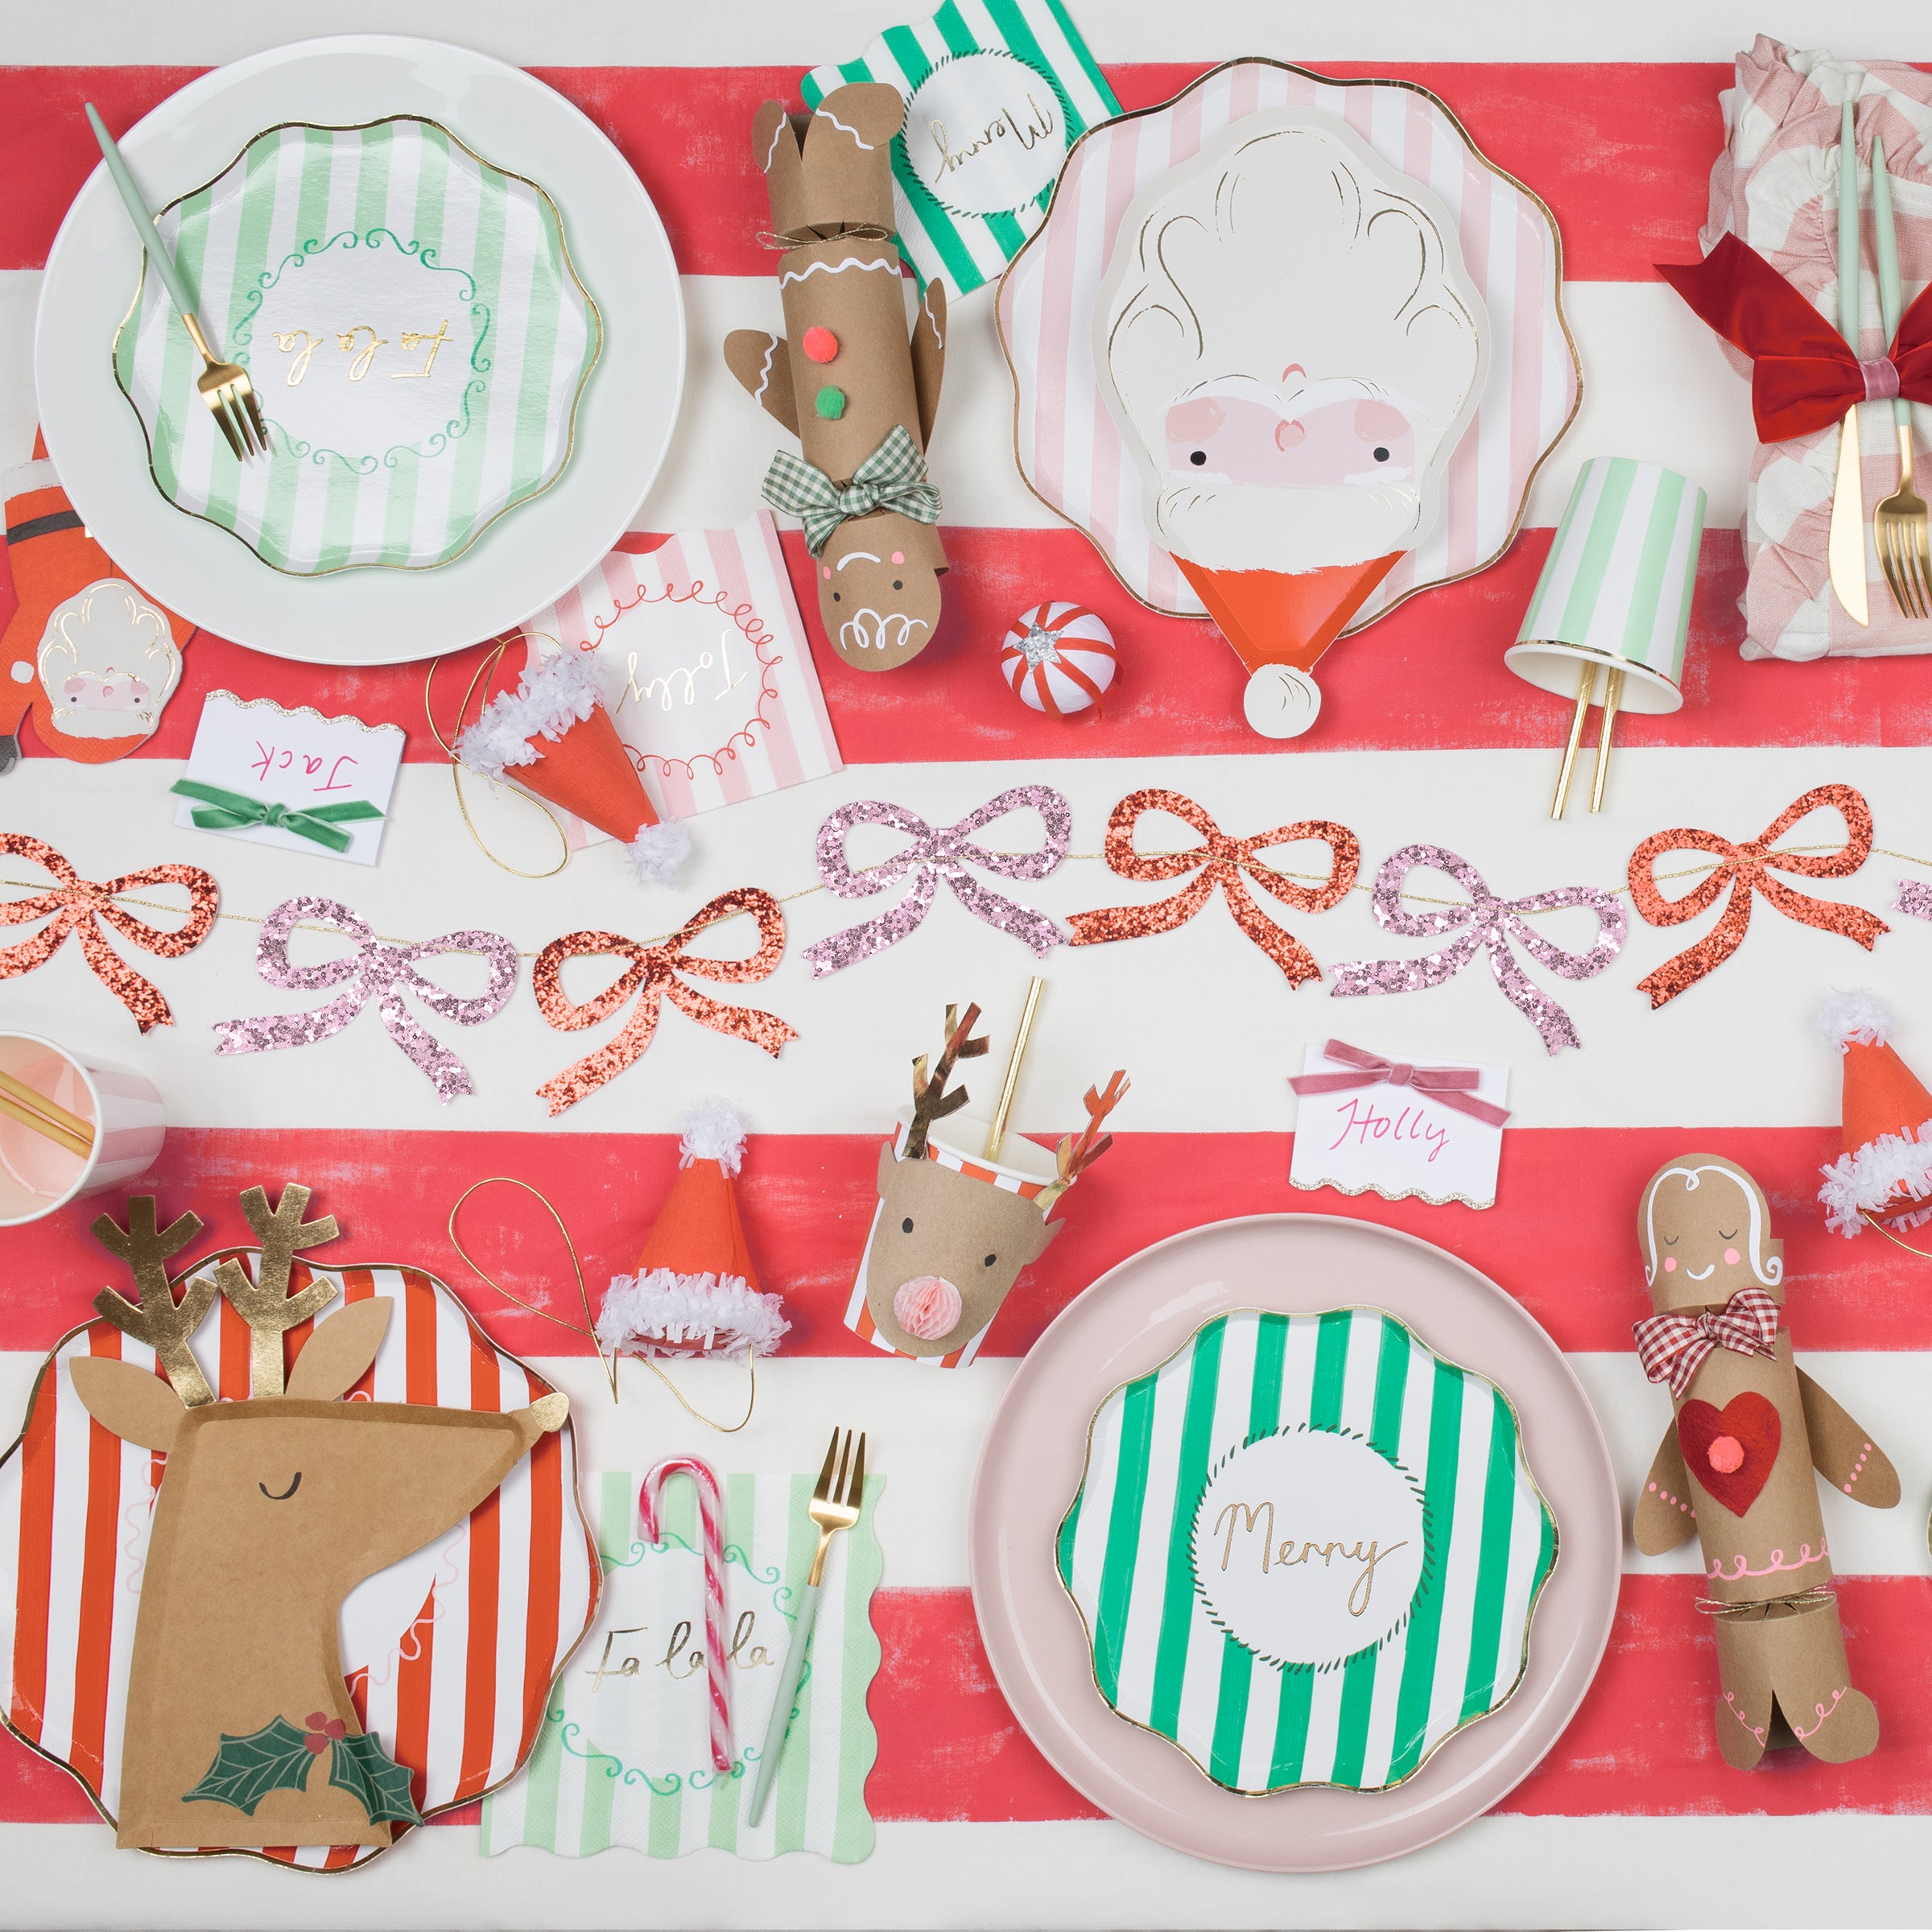 Our party plates, in the shape of a reindeer with gold foil antlers, make special Christmas table decorations.